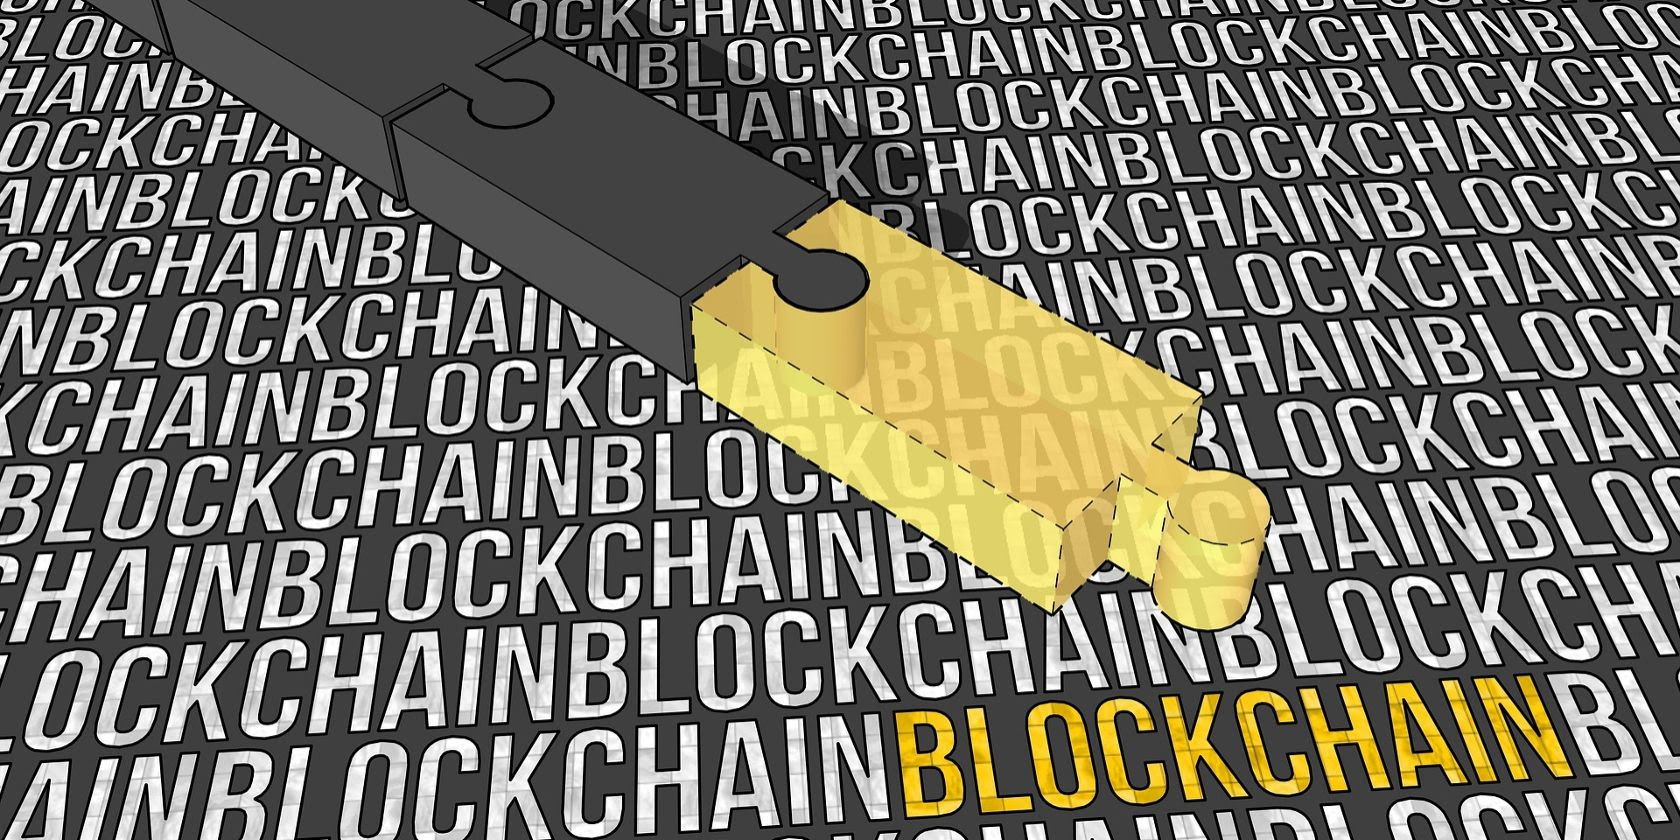 The Simple Explanation to Blockchain Technology